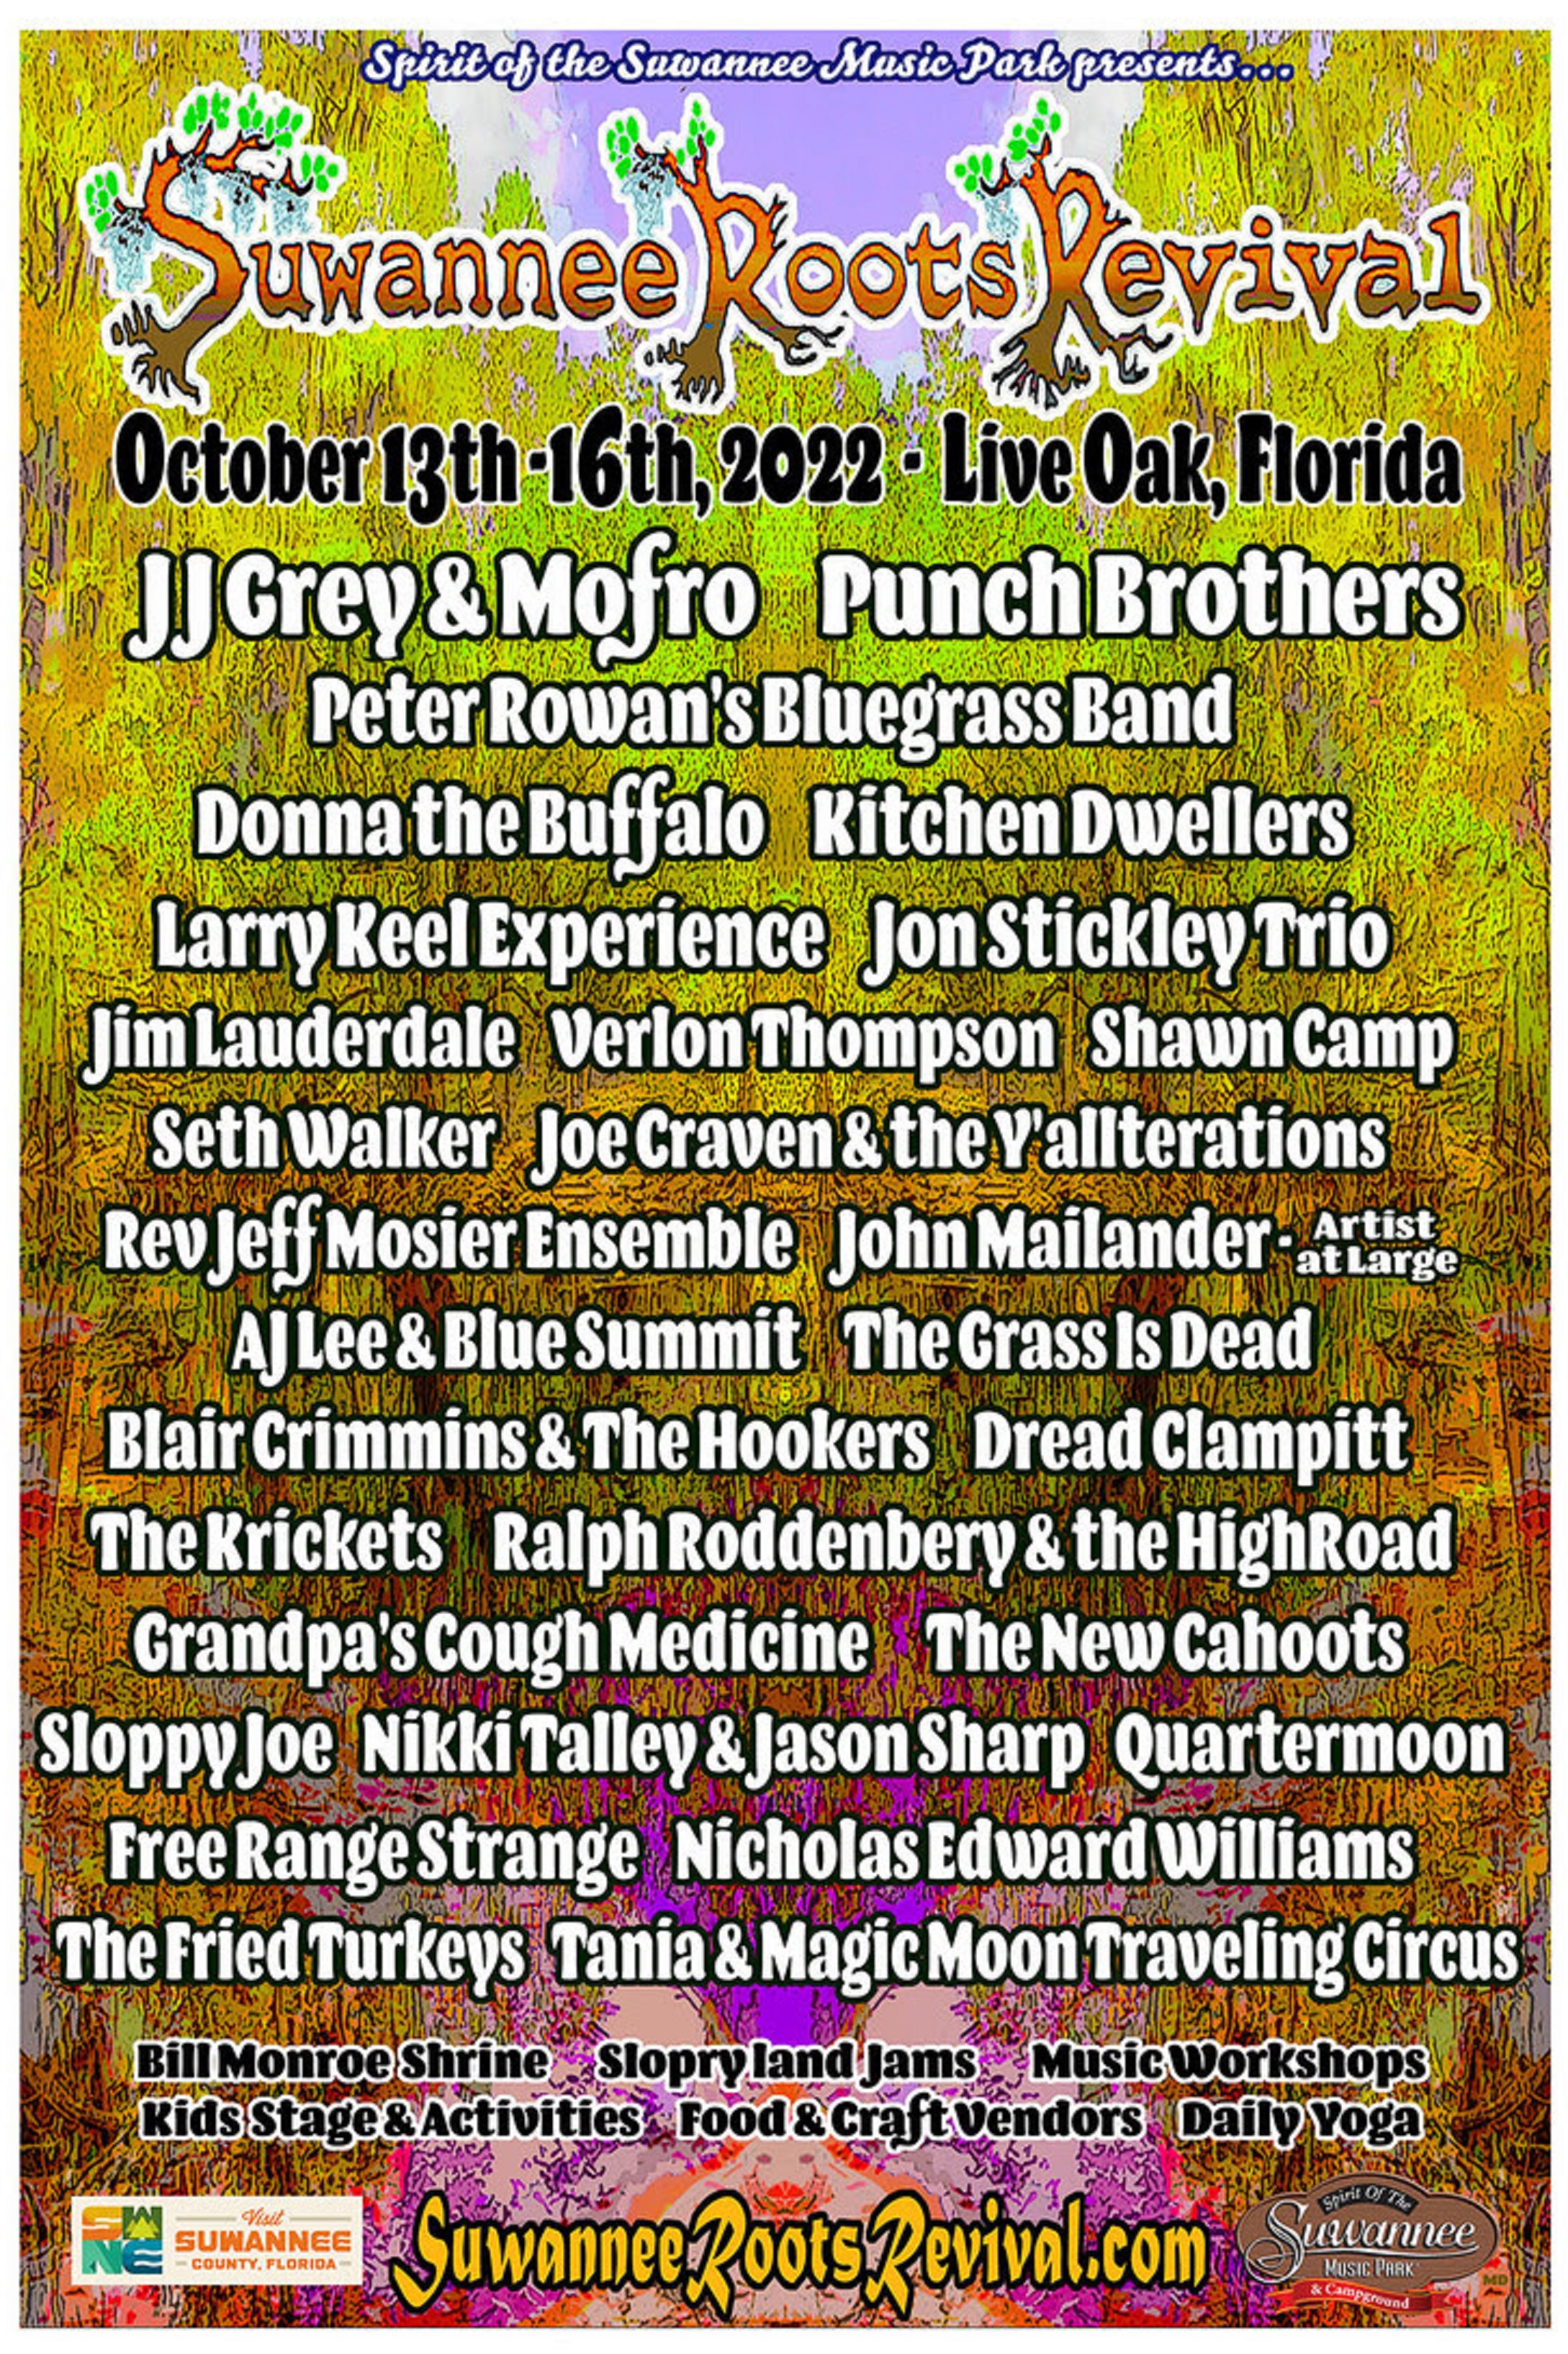 Suwannee Roots Revival Adds Larry Keel Experience and John Mailander - Oct 13-16